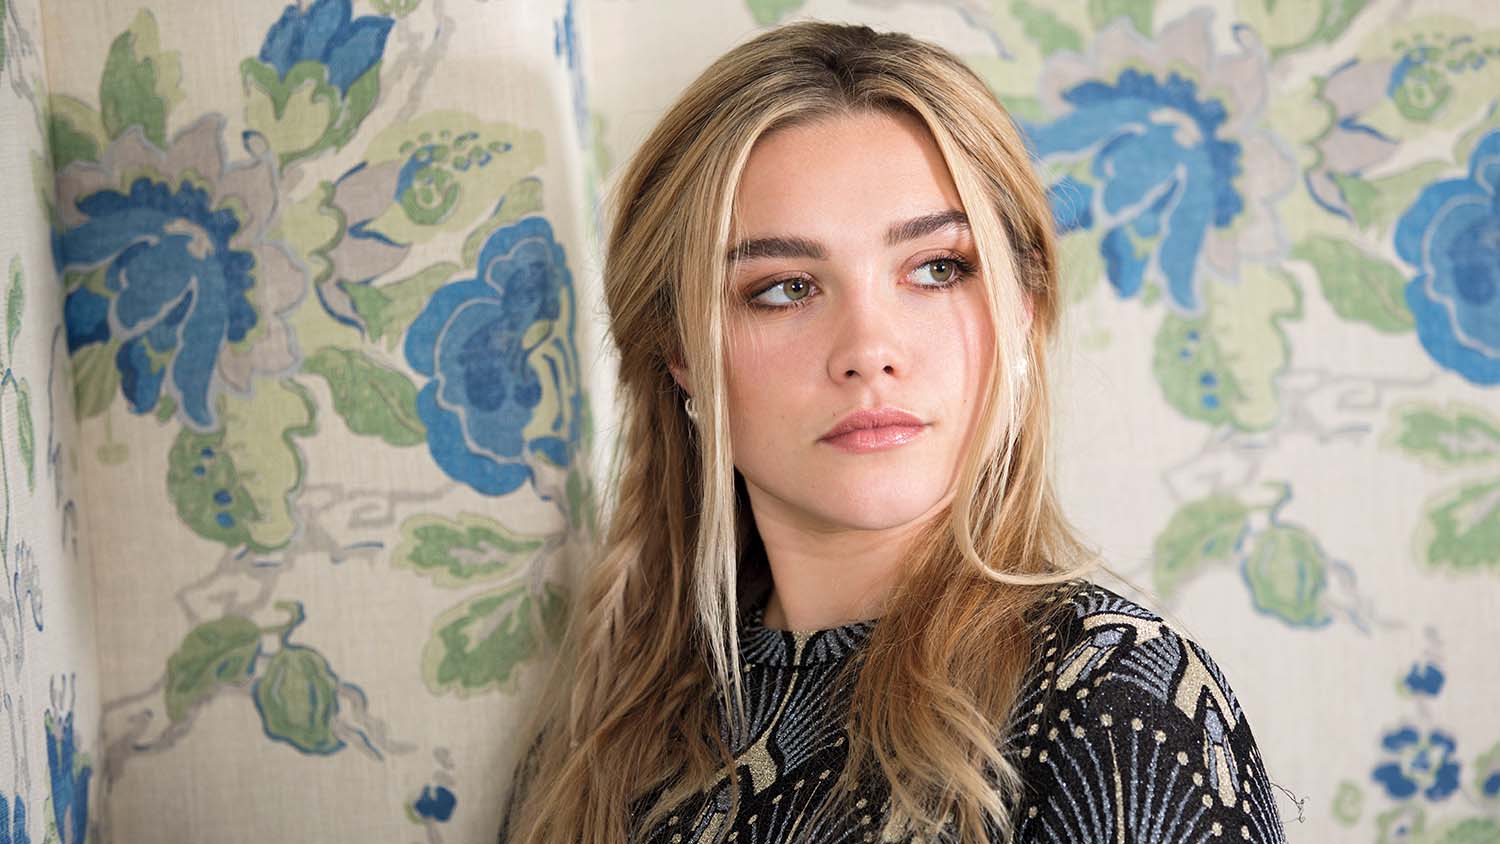 Florence Pugh at a Photoshoot